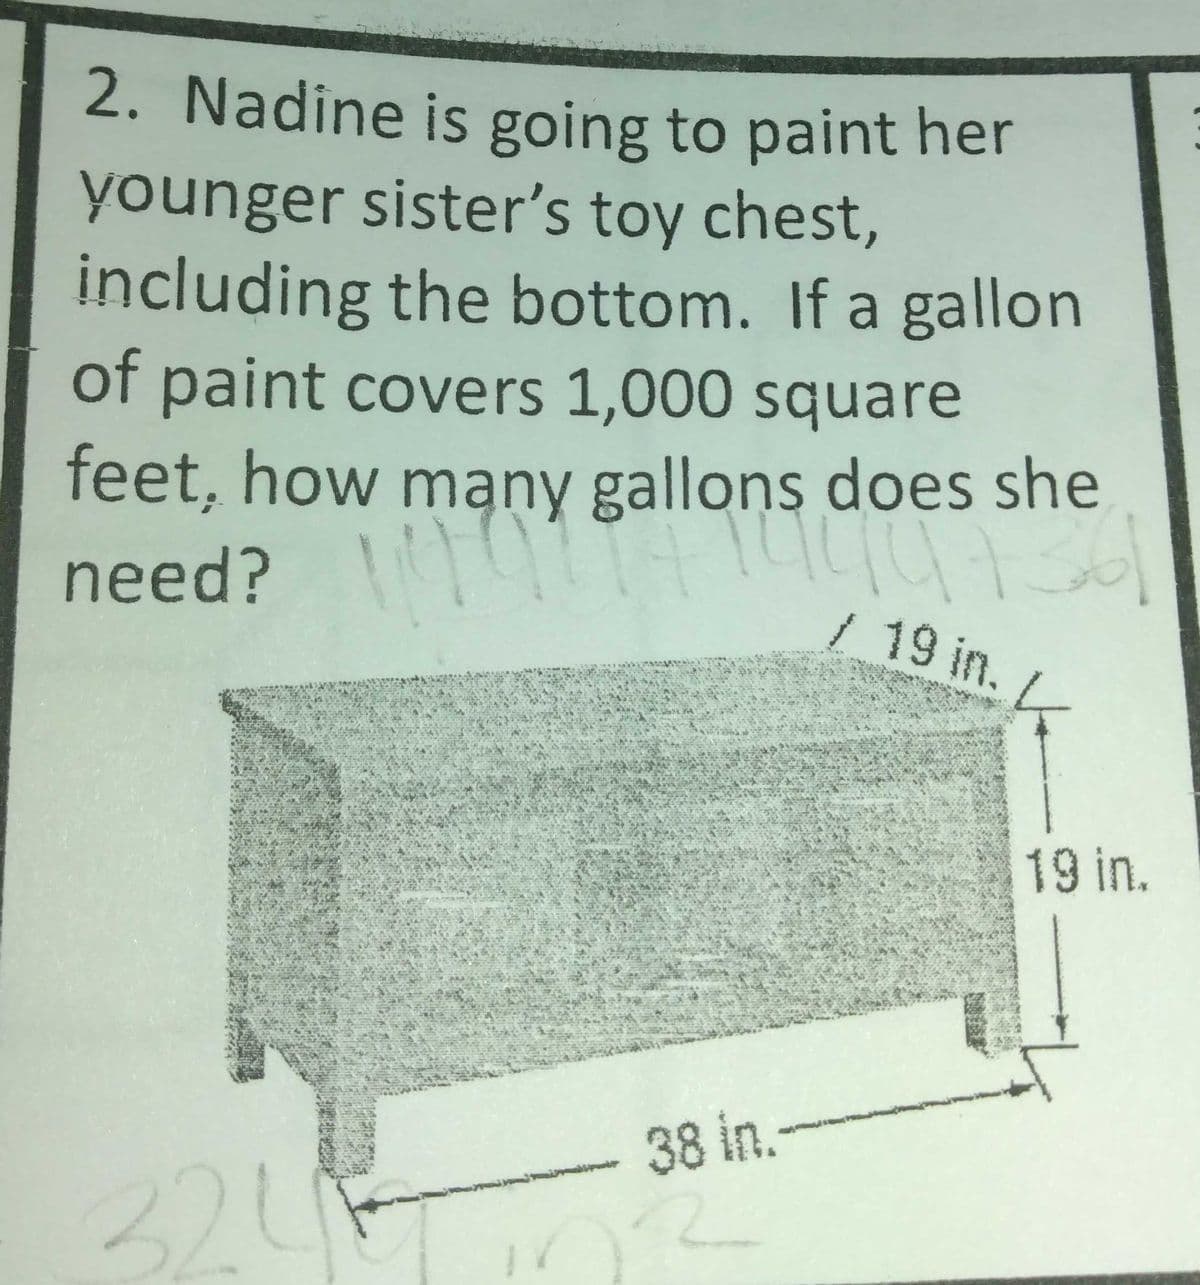 2. Nadine is going to paint her
younger sister's toy chest,
including the bottom. If a gallon
of paint covers 1,000 square
feet, how mąny gallons does she
need? t
/19 in.
19 in.
38 in.
324
